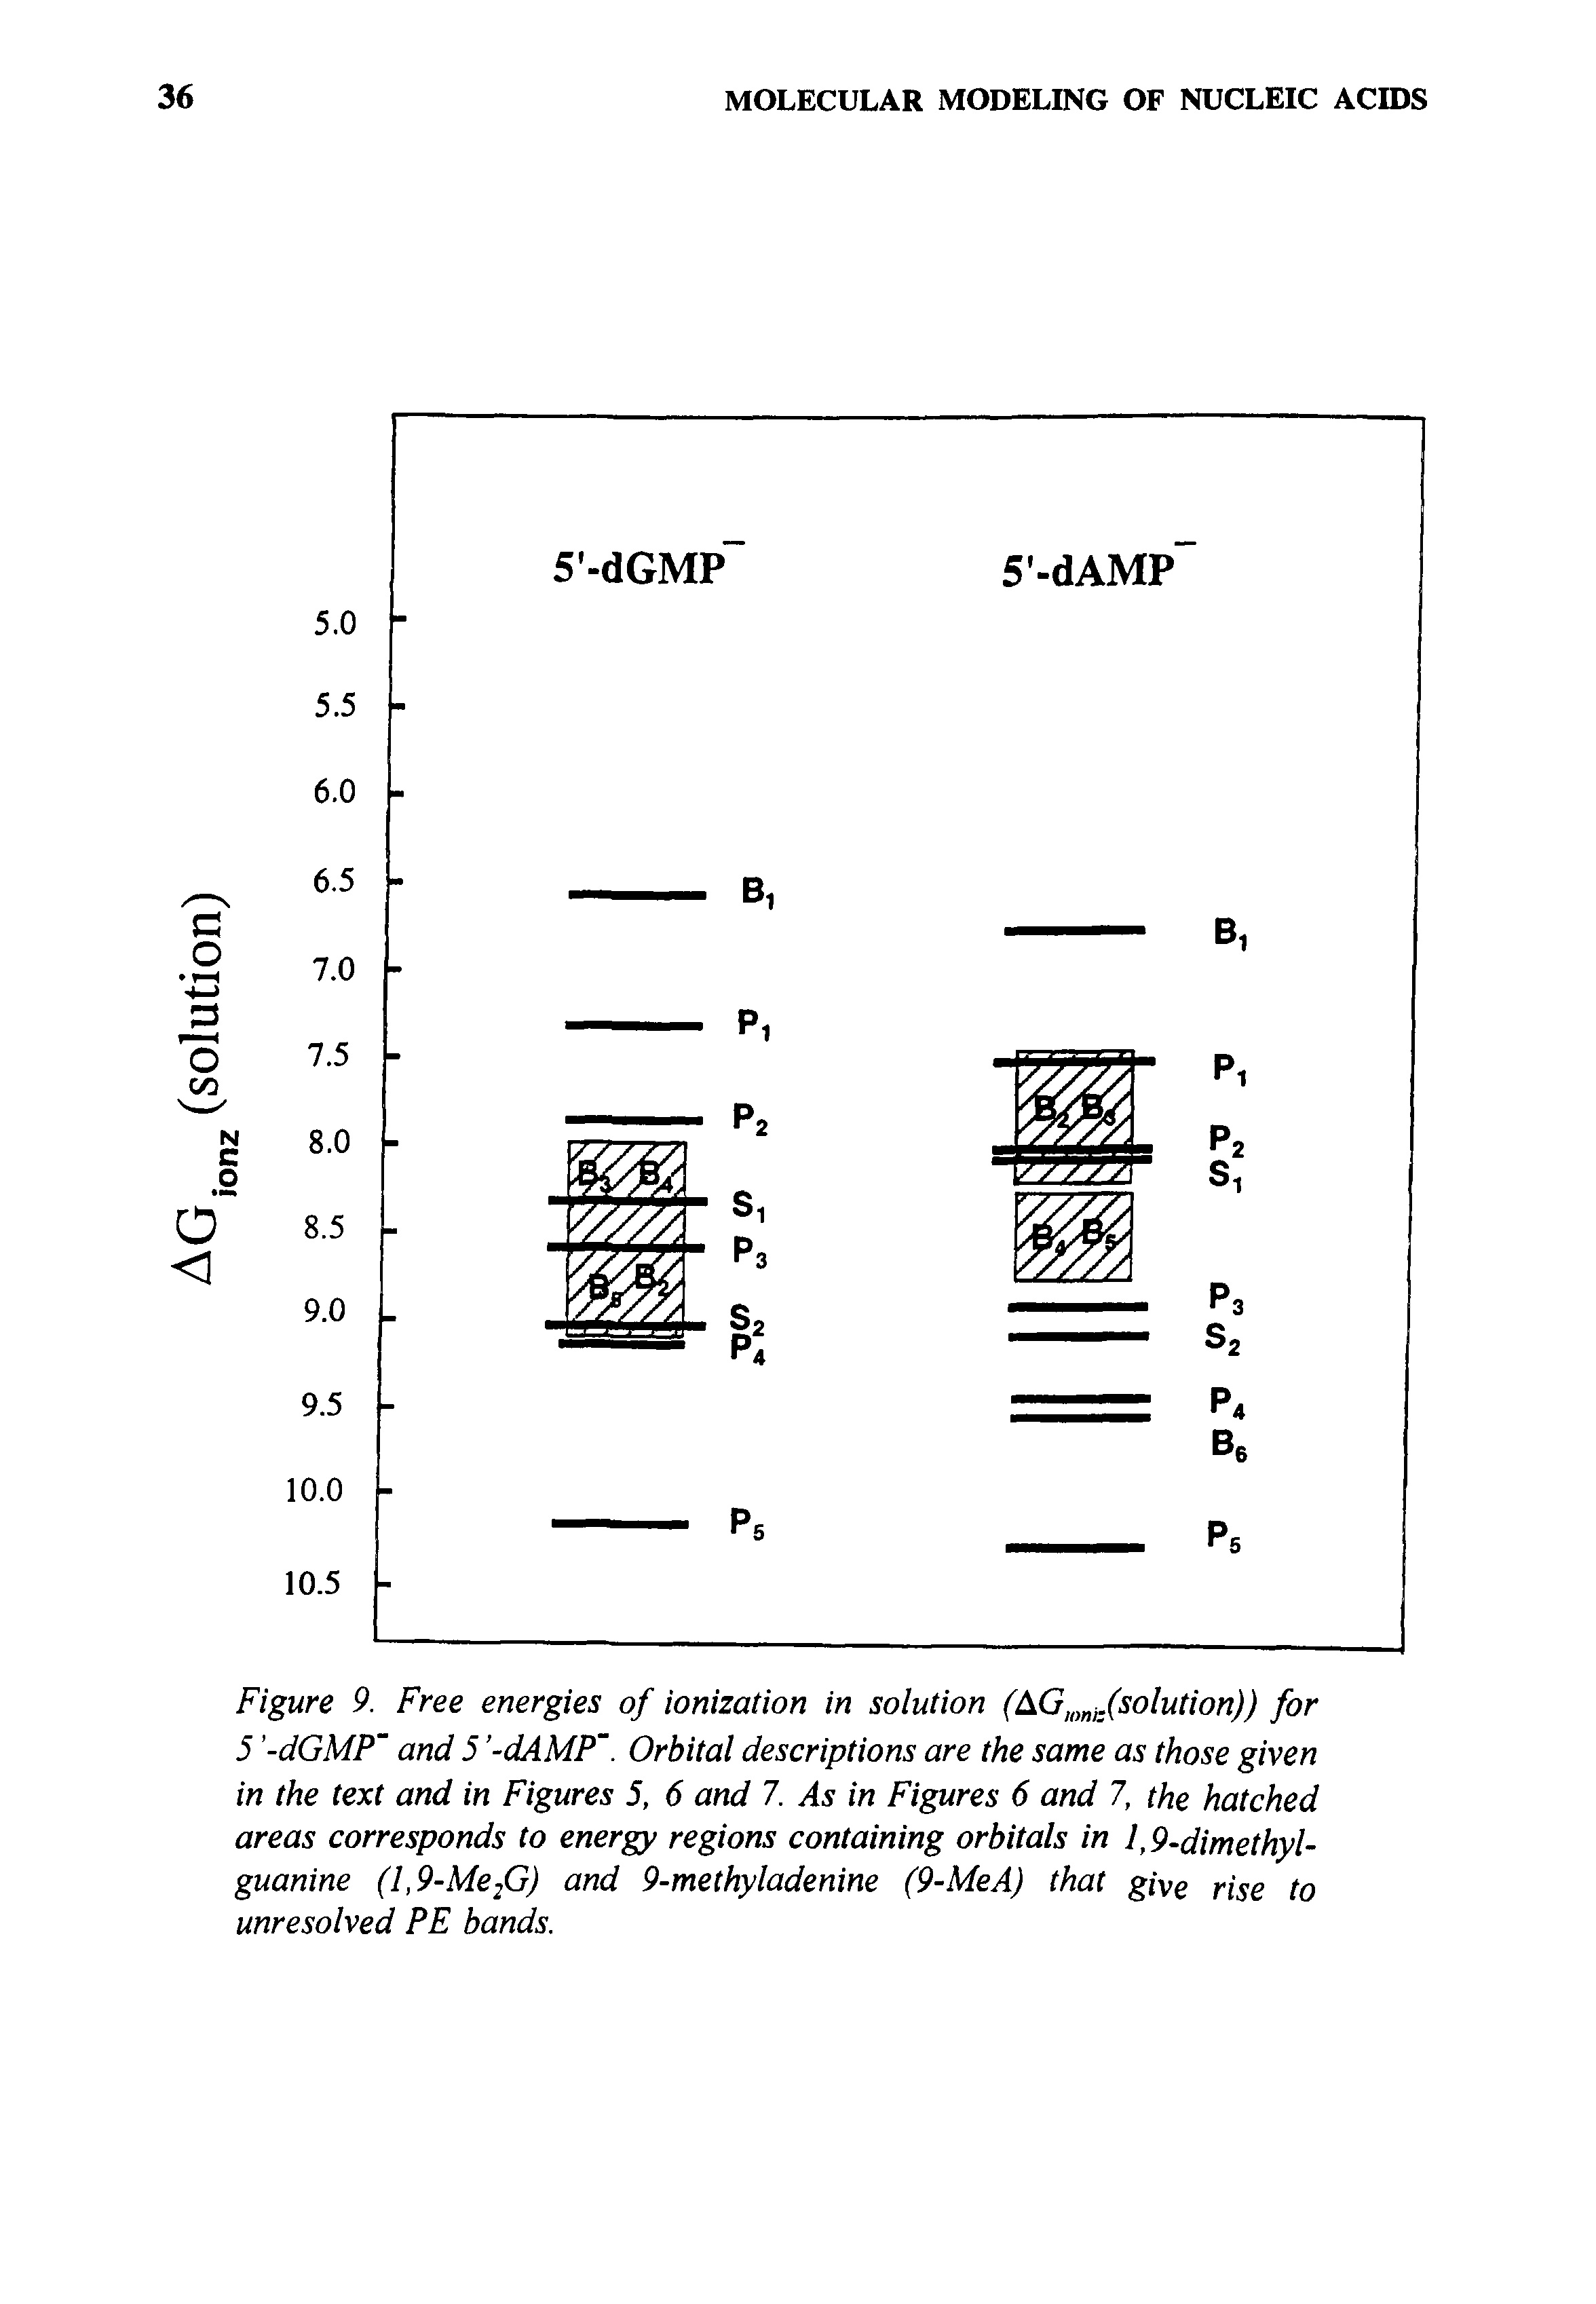 Figure 9. Free energies of ionization in solution (AG, j.(solution)) for 5 -dGMP and 5 -dAMP. Orbital descriptions are the same as those given in the text and in Figures 5, 6 and 7. As in Figures 6 and 1, the hatched areas corresponds to energy regions containing orbitals in 1,9.dimethyl-guanine (l,9-Me2G) and 9-methyladenine (9-MeA) that rise to unresolved PE bands.